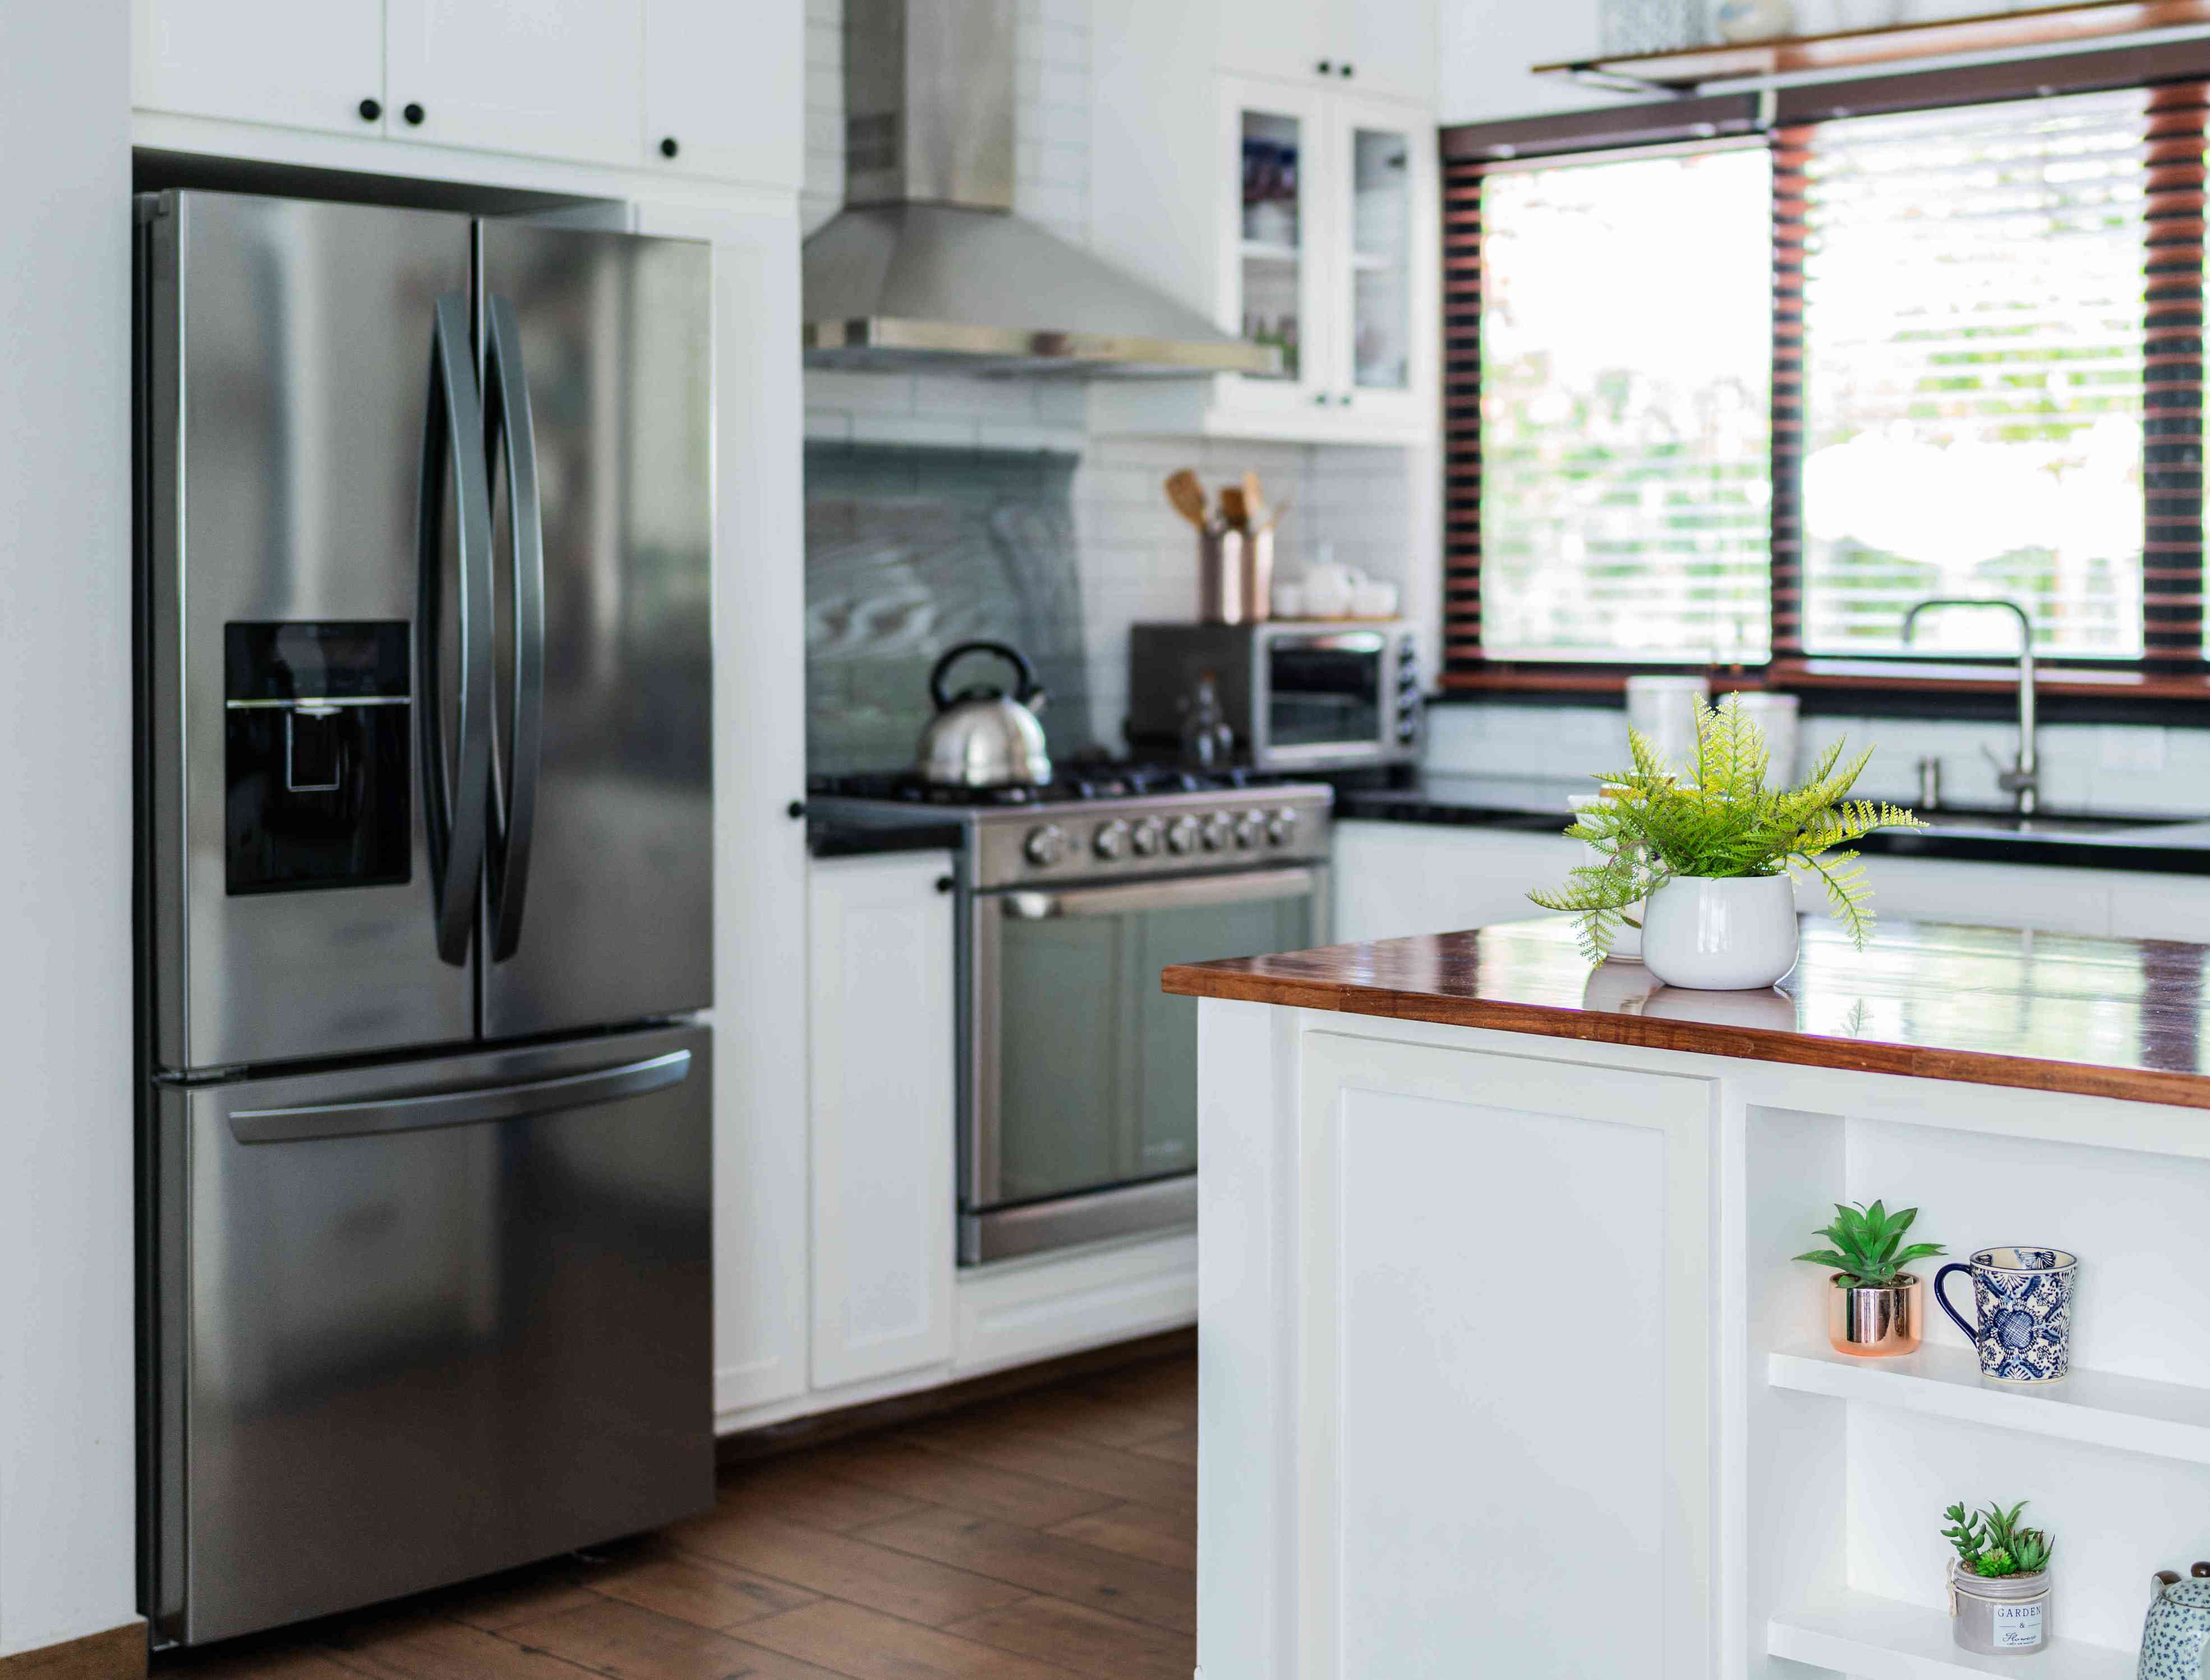 more than 380,000 refrigerators have been recalled due to choking and laceration risks